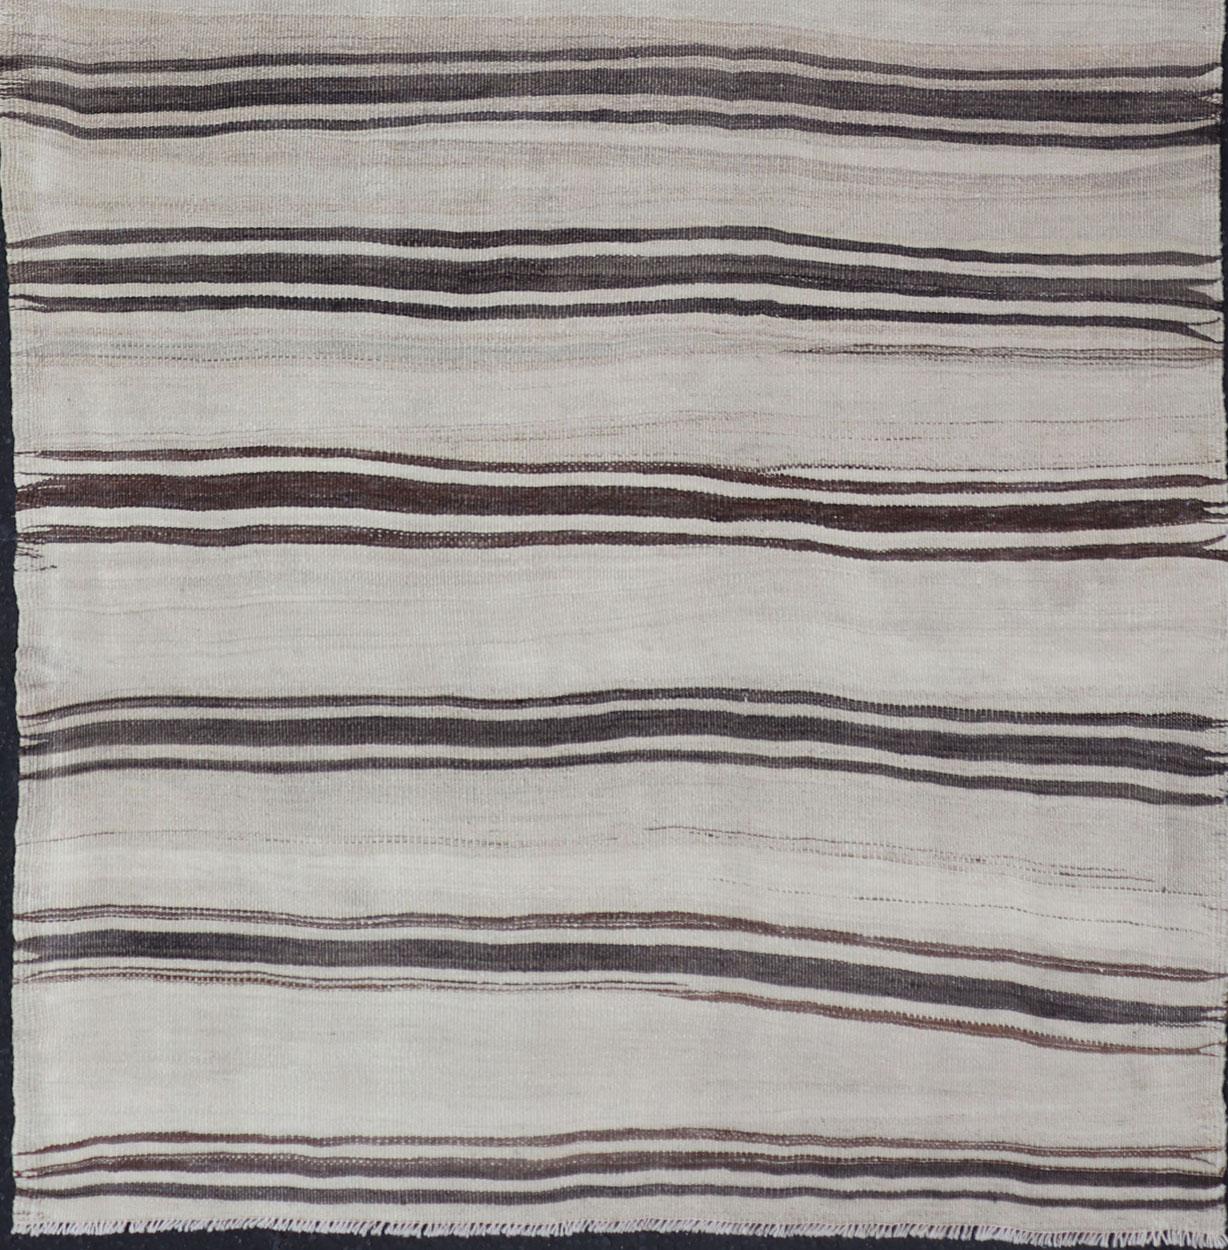 Hand-Woven Turkish Vintage Flat-Weave in Shades of Brown and Ivory with Stripe Design For Sale